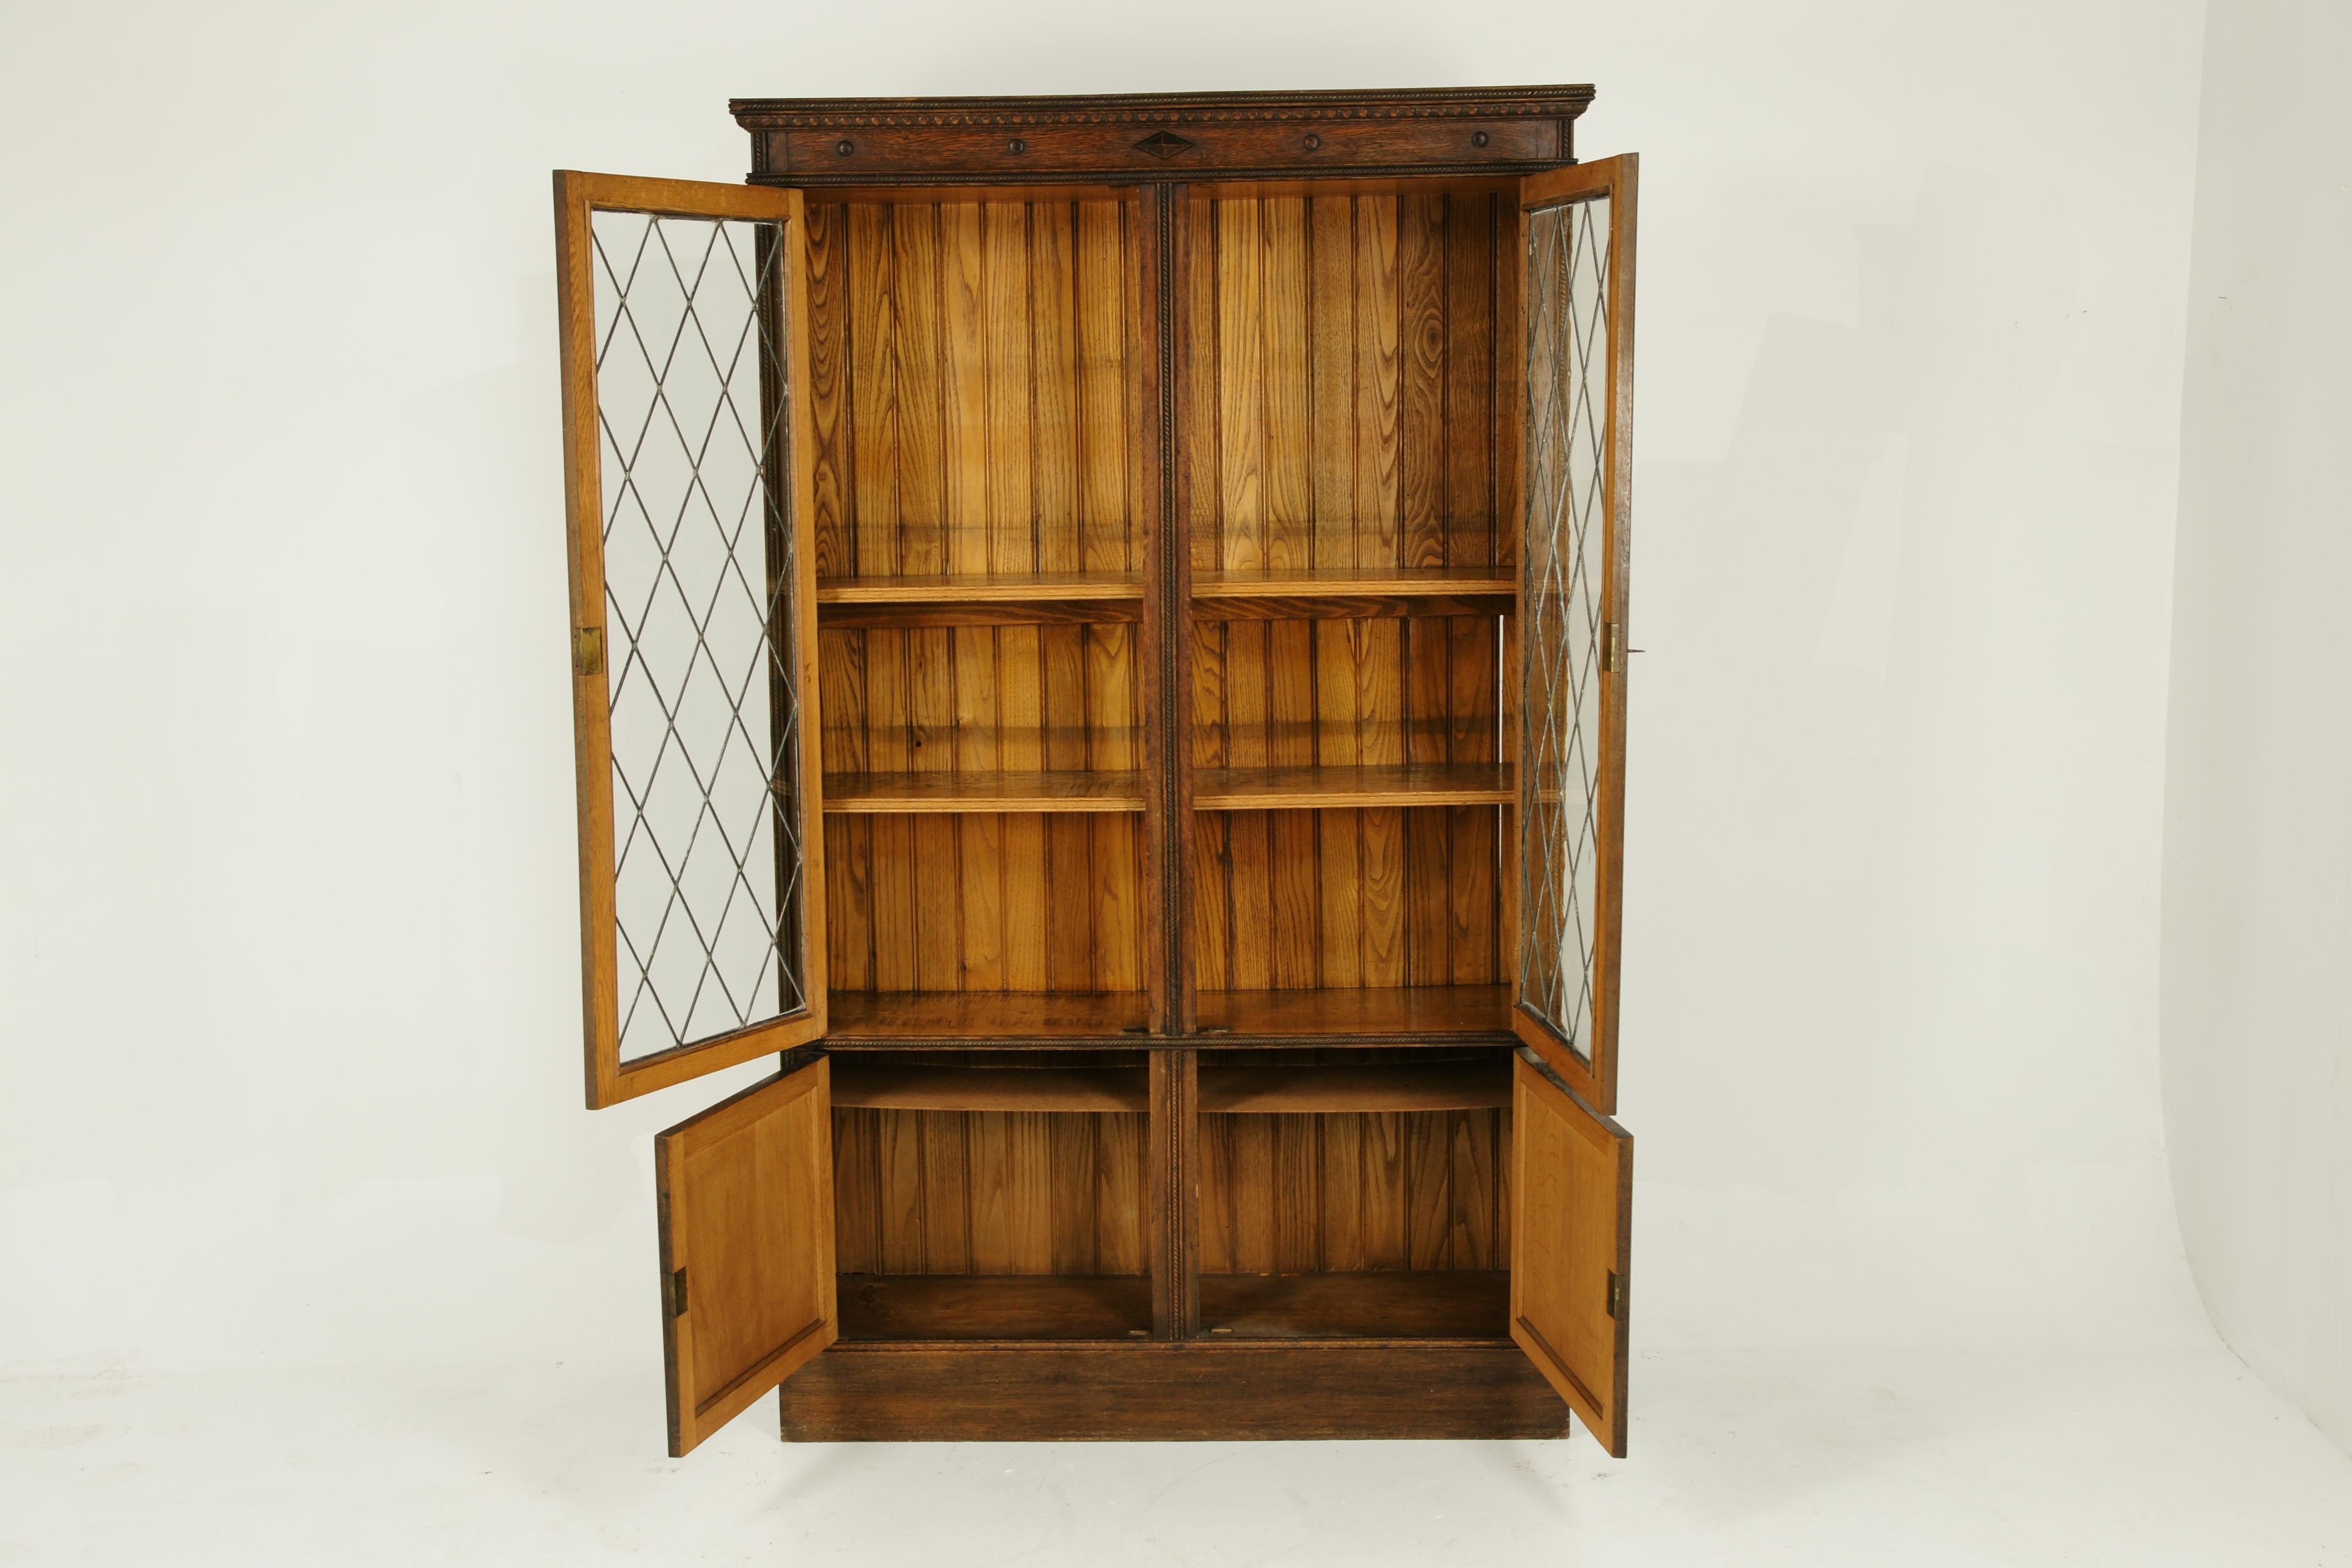 Antique bookcase, leaded glass bookcase, display cabinet, Arts & Crafts, scotland 1910, Antique Furniture, B1356, 

Scotland, 1910
Solid oak construction
Original Finish
Carved cornice above
Pair of tall original leaded glass doors
Open to reveal